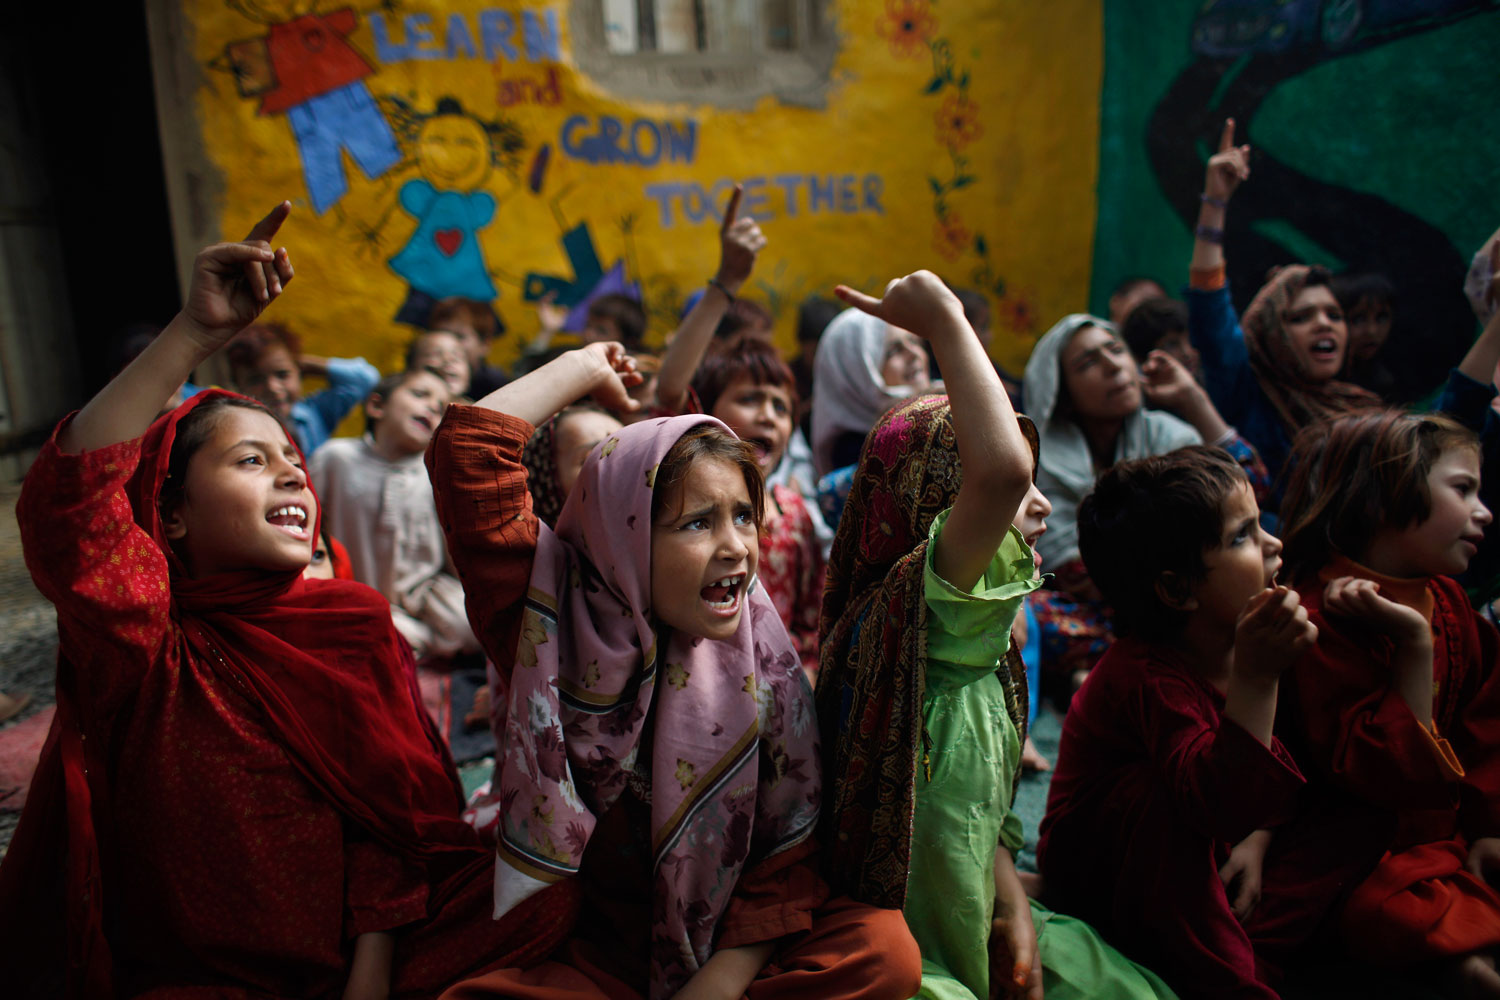 Image: Oct. 19, 2012. Pakistani students, displaced along with their families from Pakistan's tribal areas due to fighting between militants and the army, chant a song with their teacher, not pictured, during their daily school in a poor neighborhood on the outskirts of Islamabad.